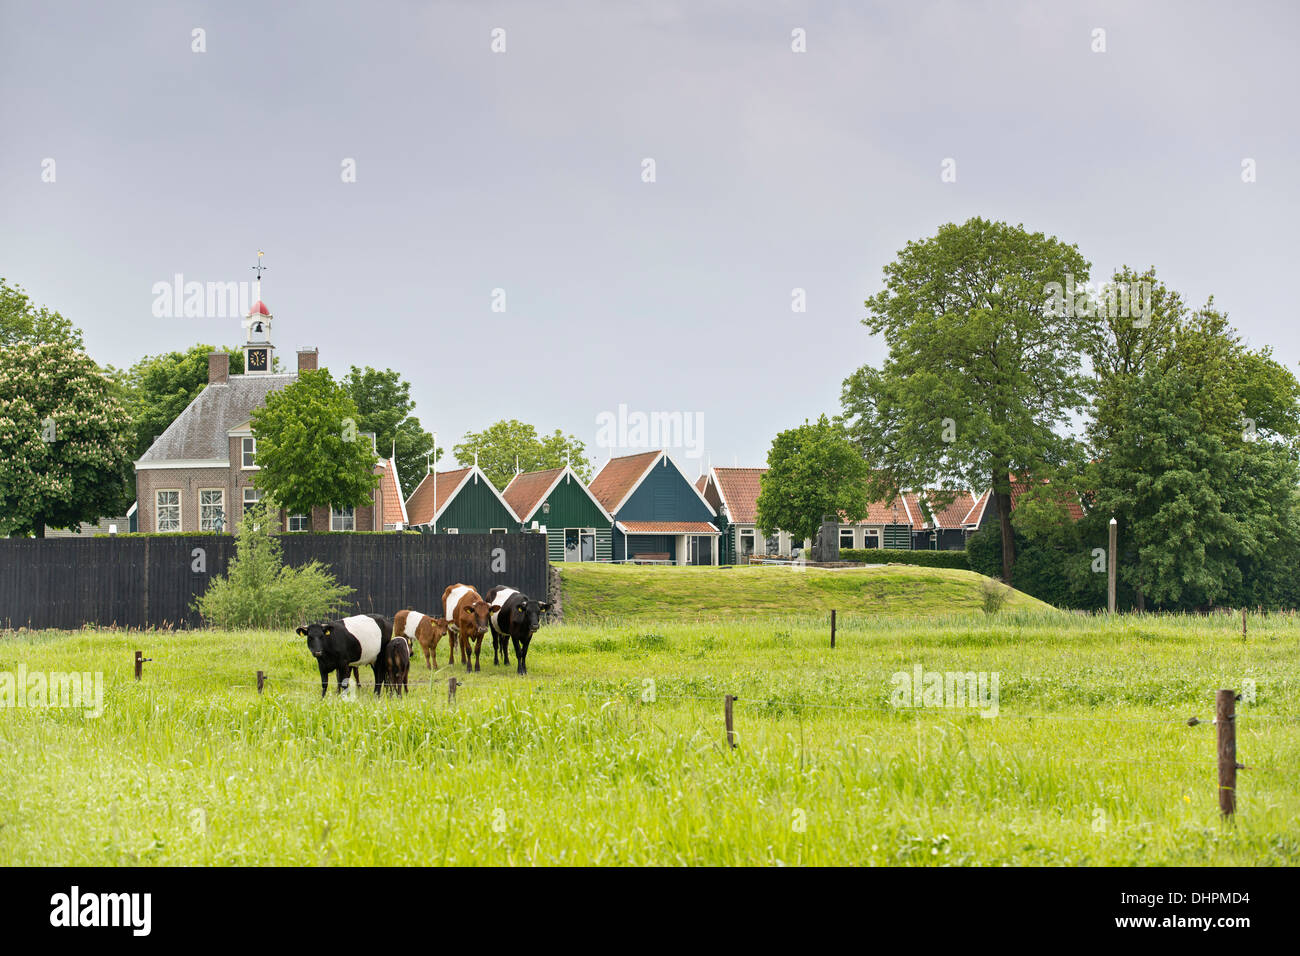 The Netherlands, The former island of Schokland. UNESCO World Heritage Site. Mound of Middelbuurt. Foreground sheeted cows Stock Photo